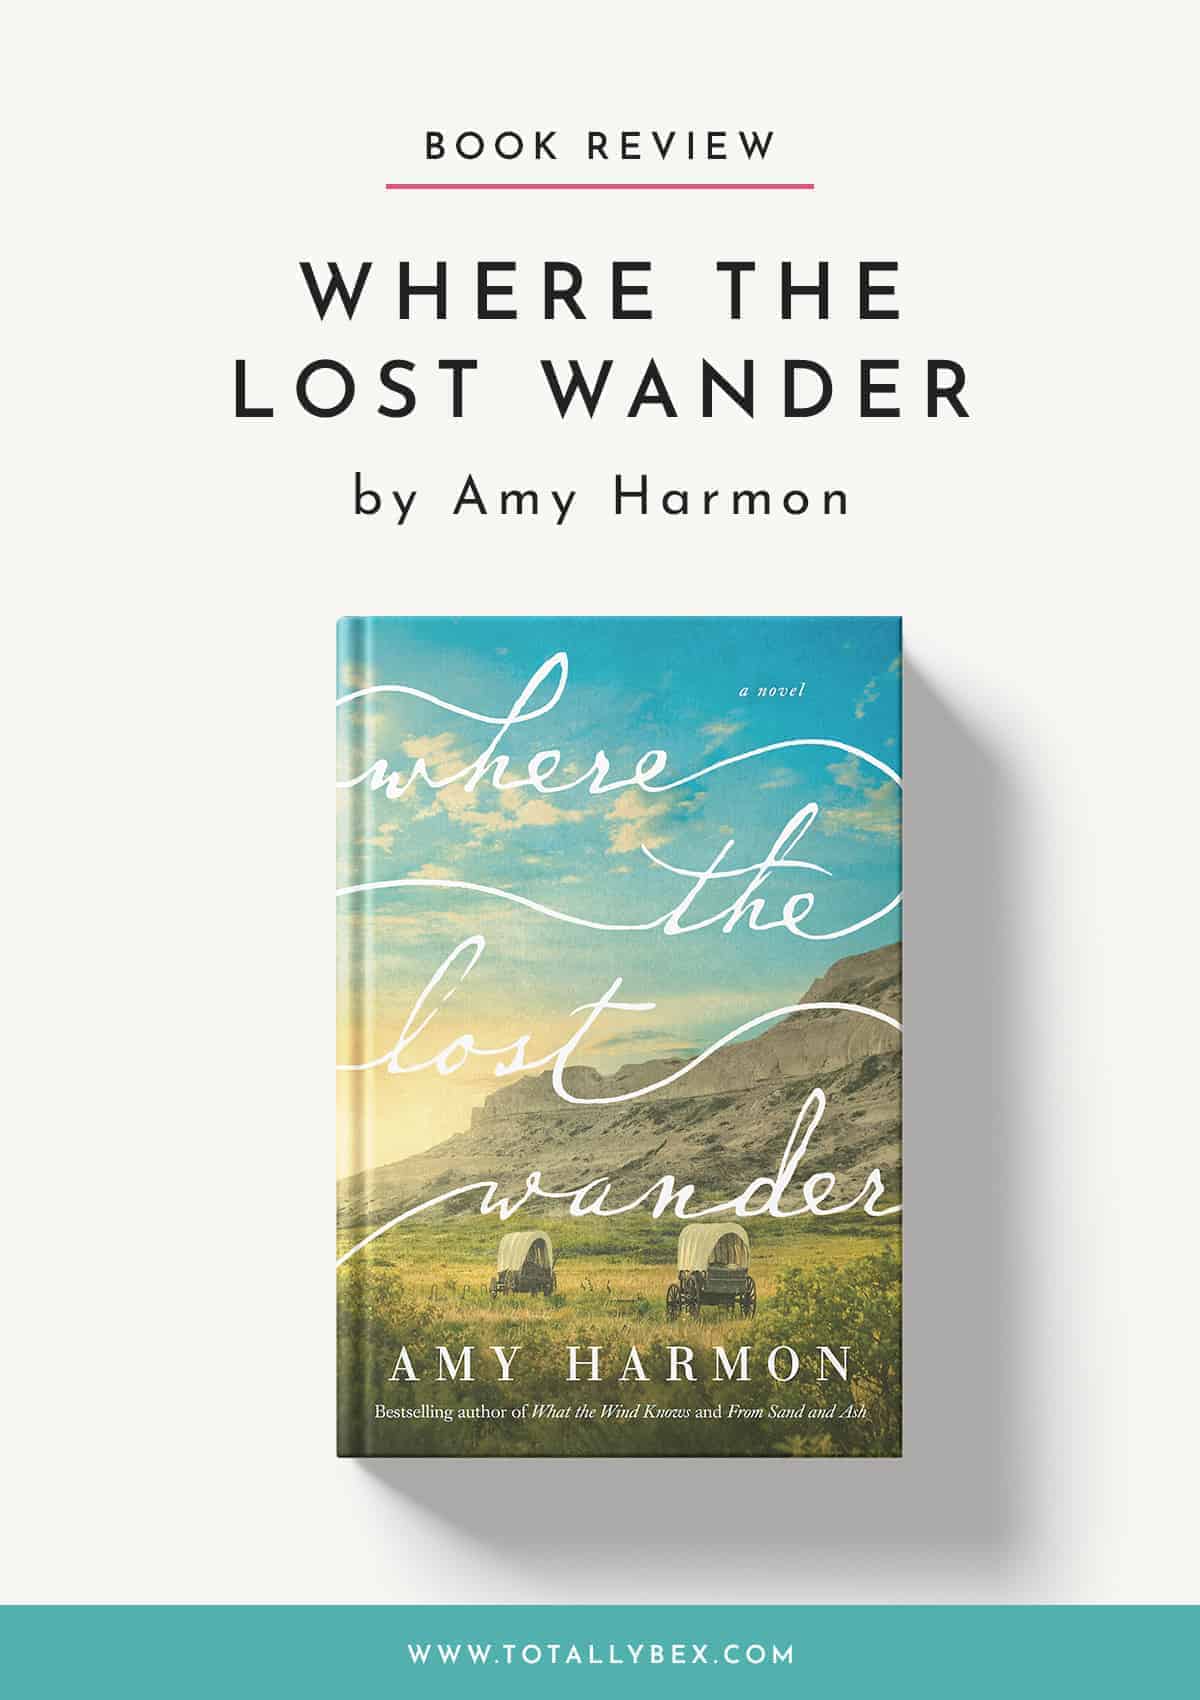 Where the Lost Wander by Amy Harmon is a beautifully detailed and mesmerizing story of American Pioneers in the 1850s. It is both gorgeous and thrilling!